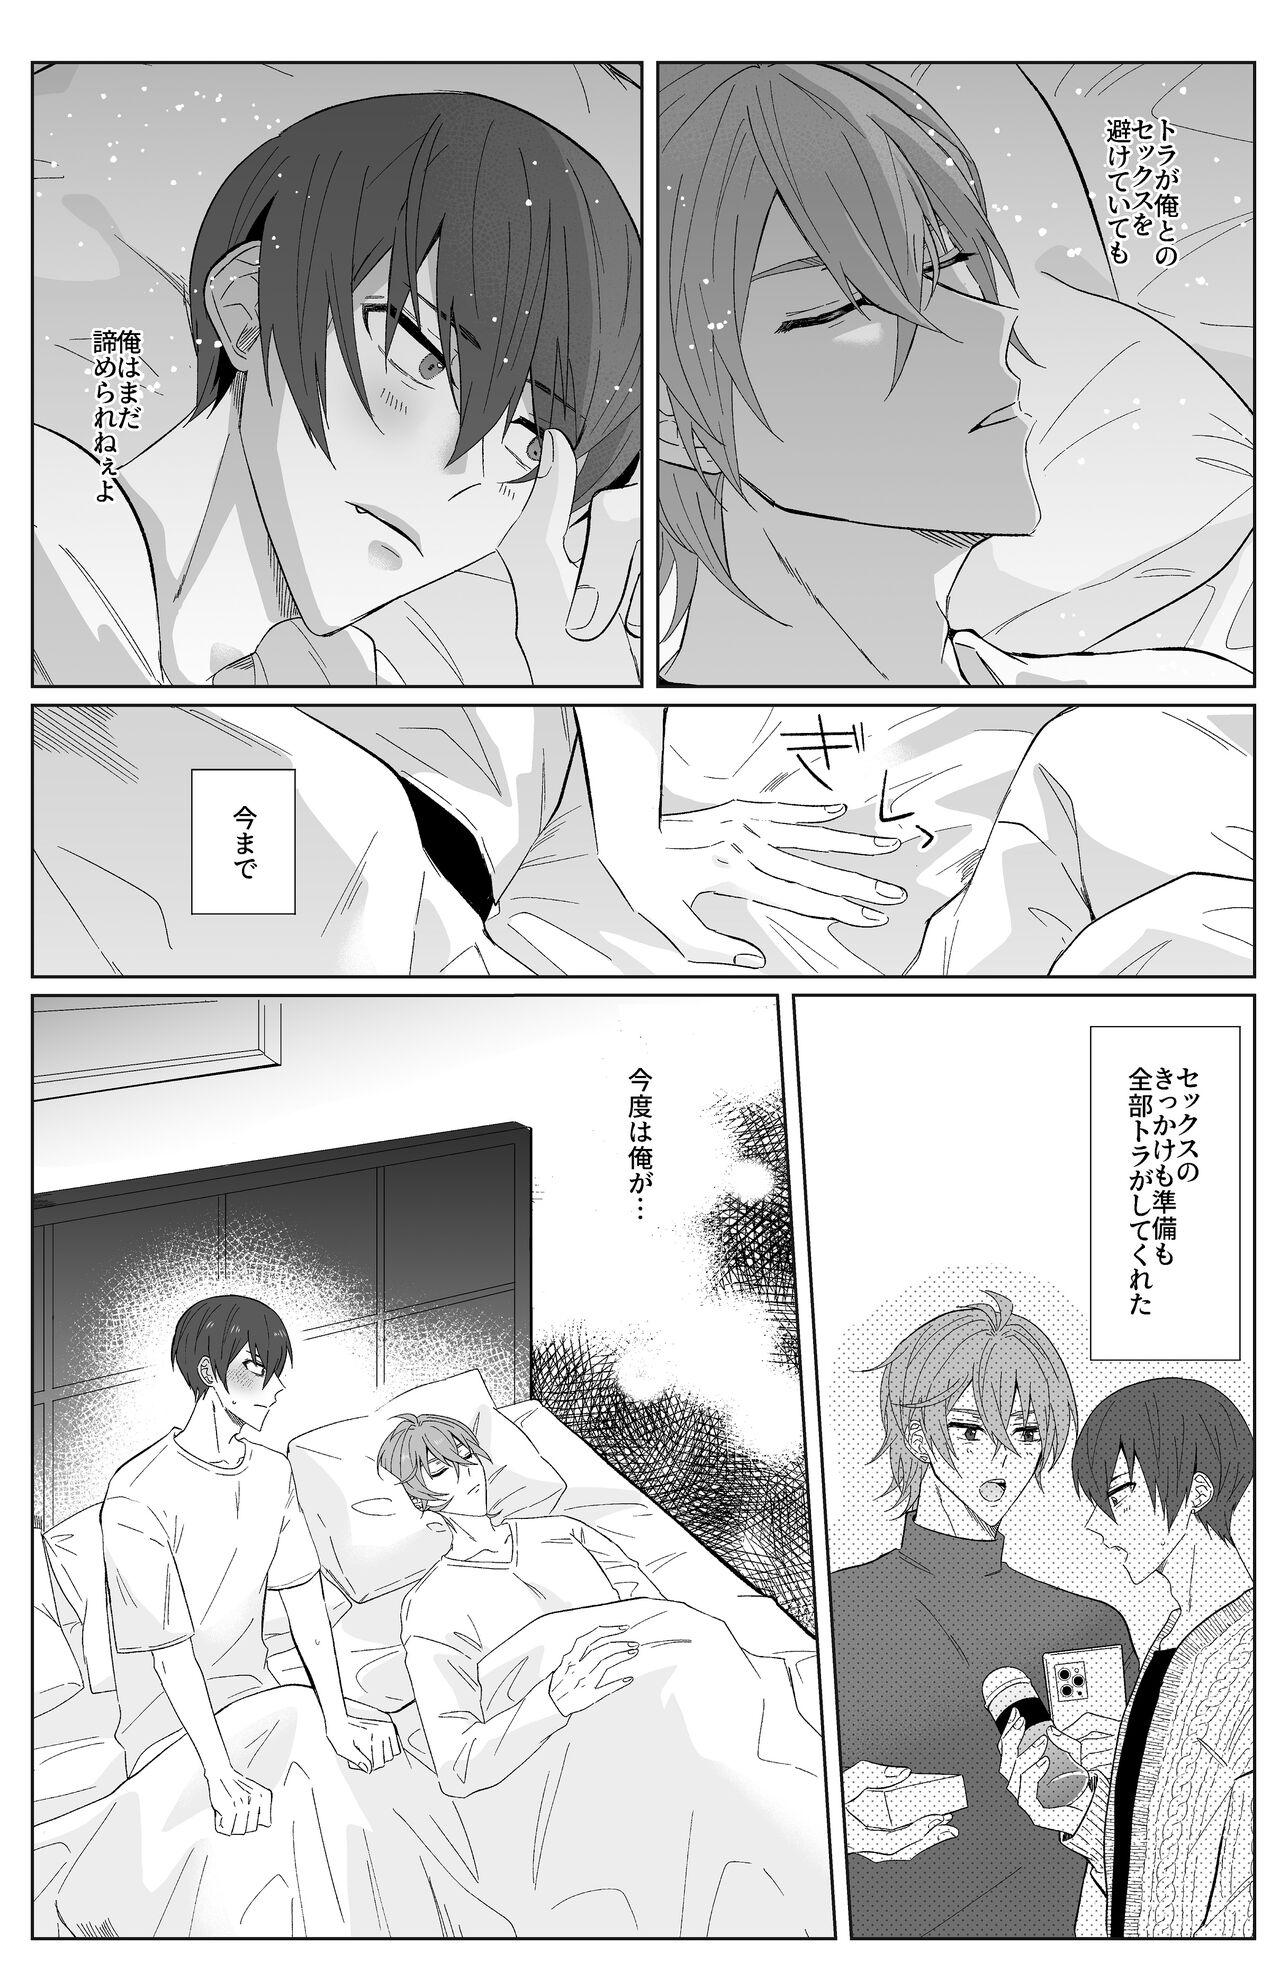 Facials Second Attempt - Idolish7 Nasty - Page 11